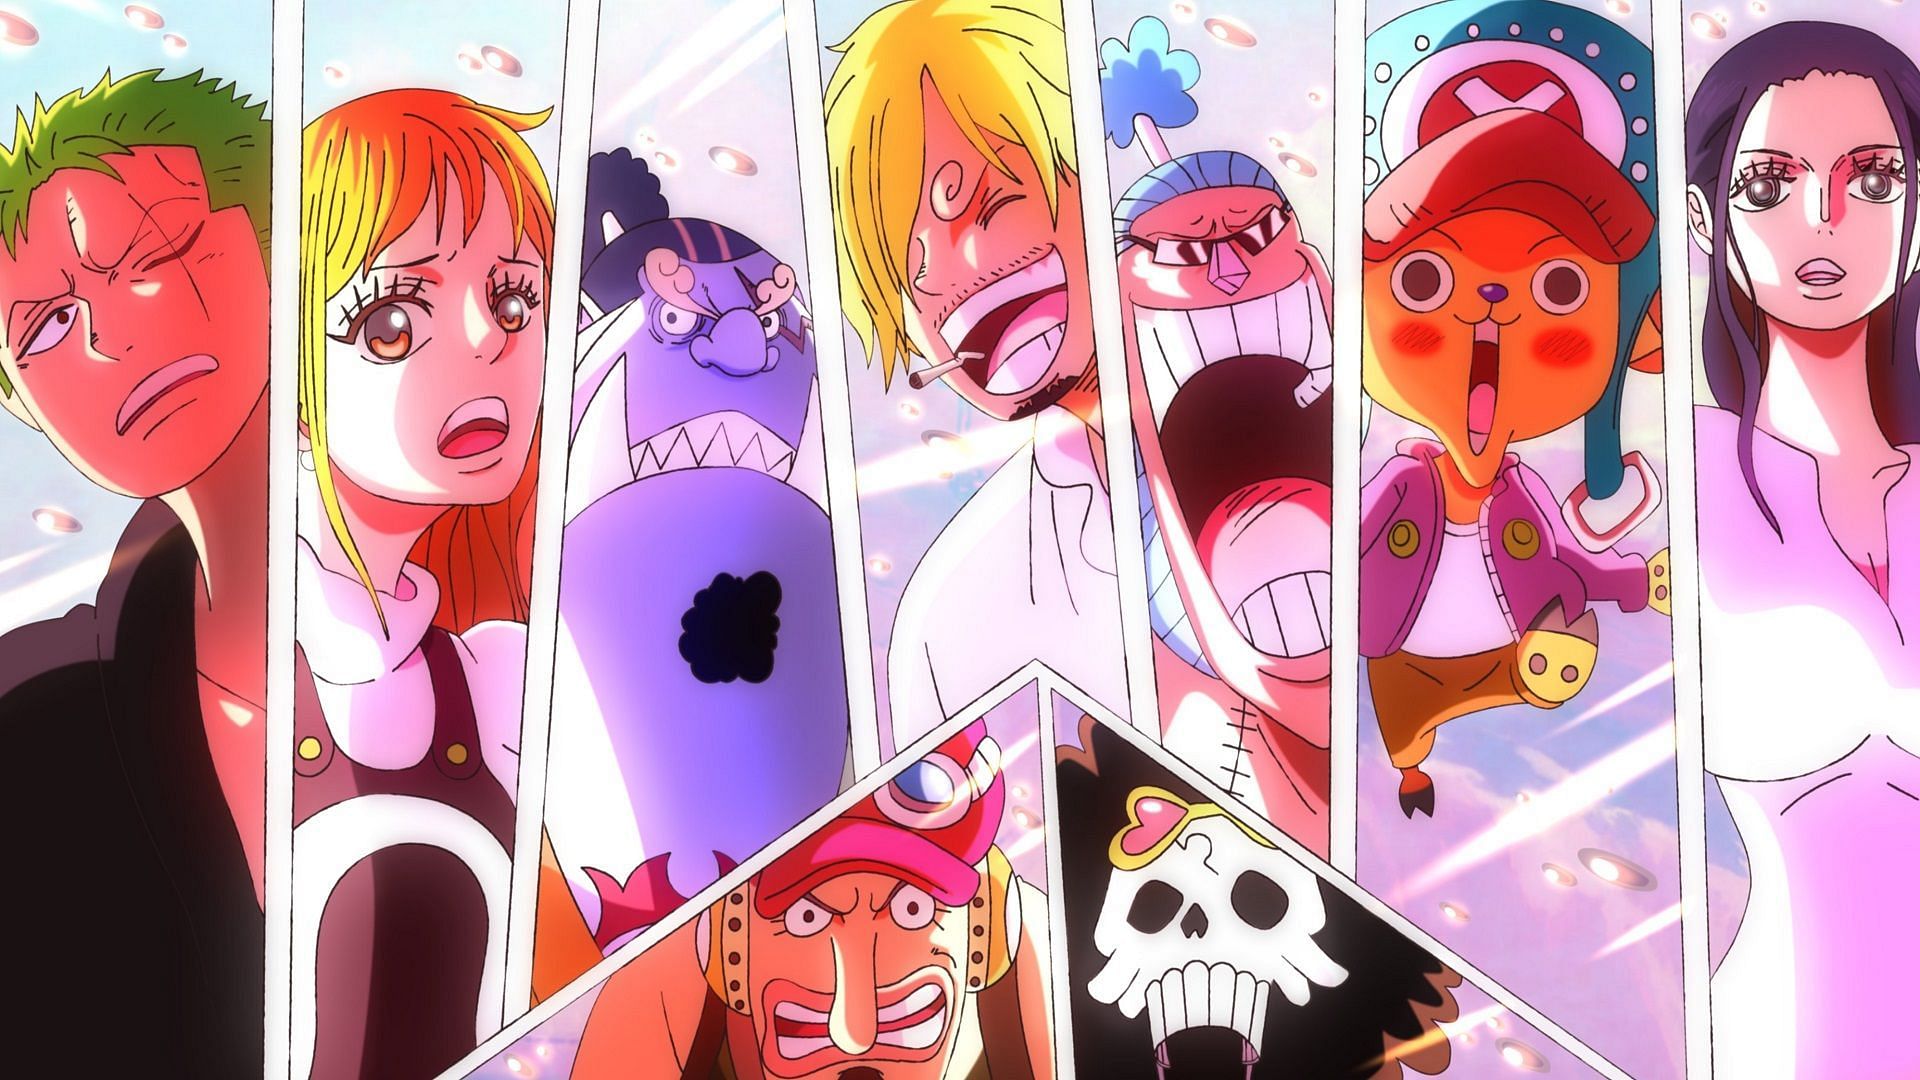 One Piece volume 107 SBS leaks reveal details about Luffy's true dream, the  name of Bonney's Devil Fruit, and more